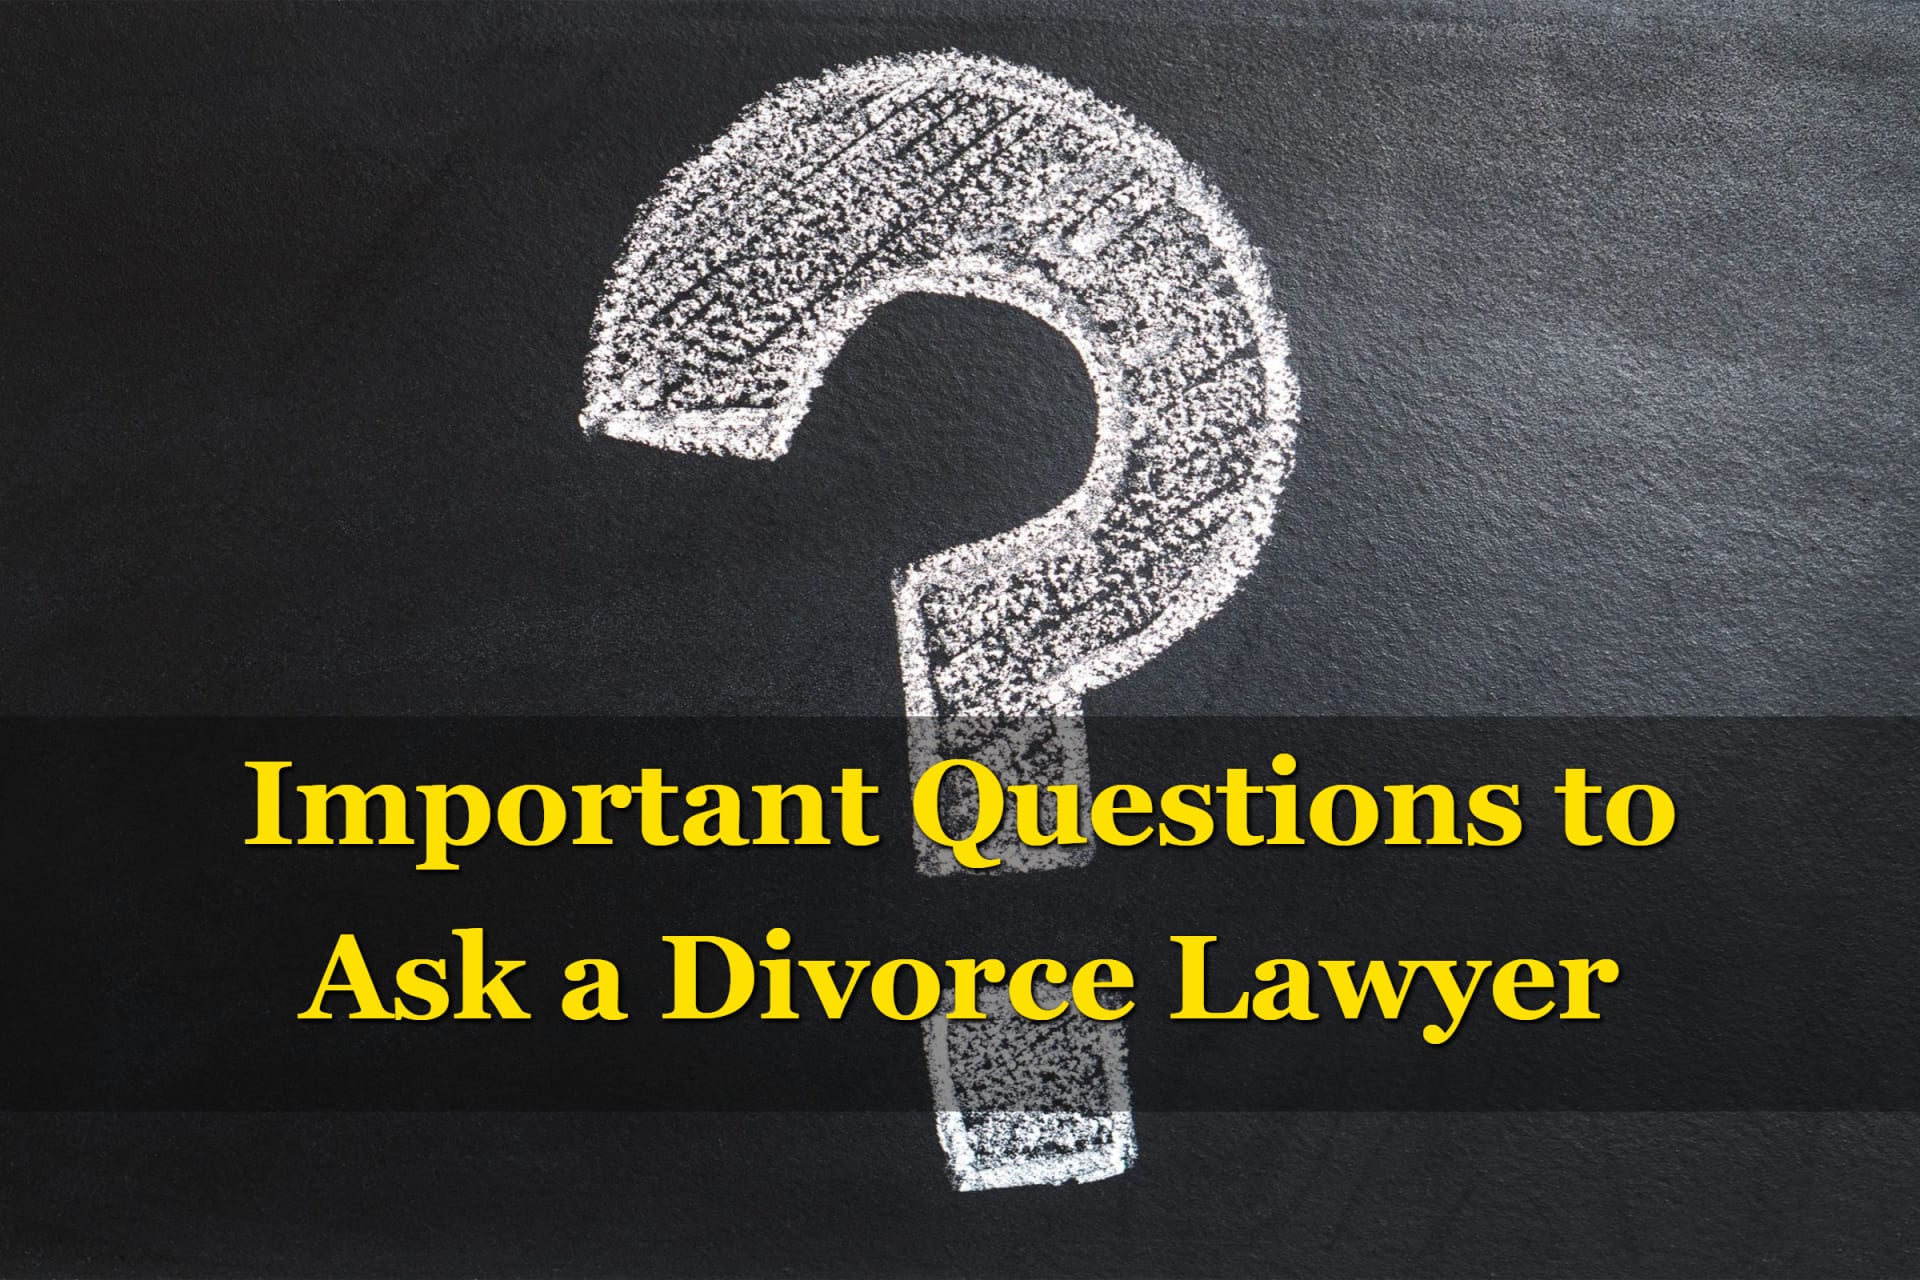 Important Questions To Ask a Divorce Lawyer